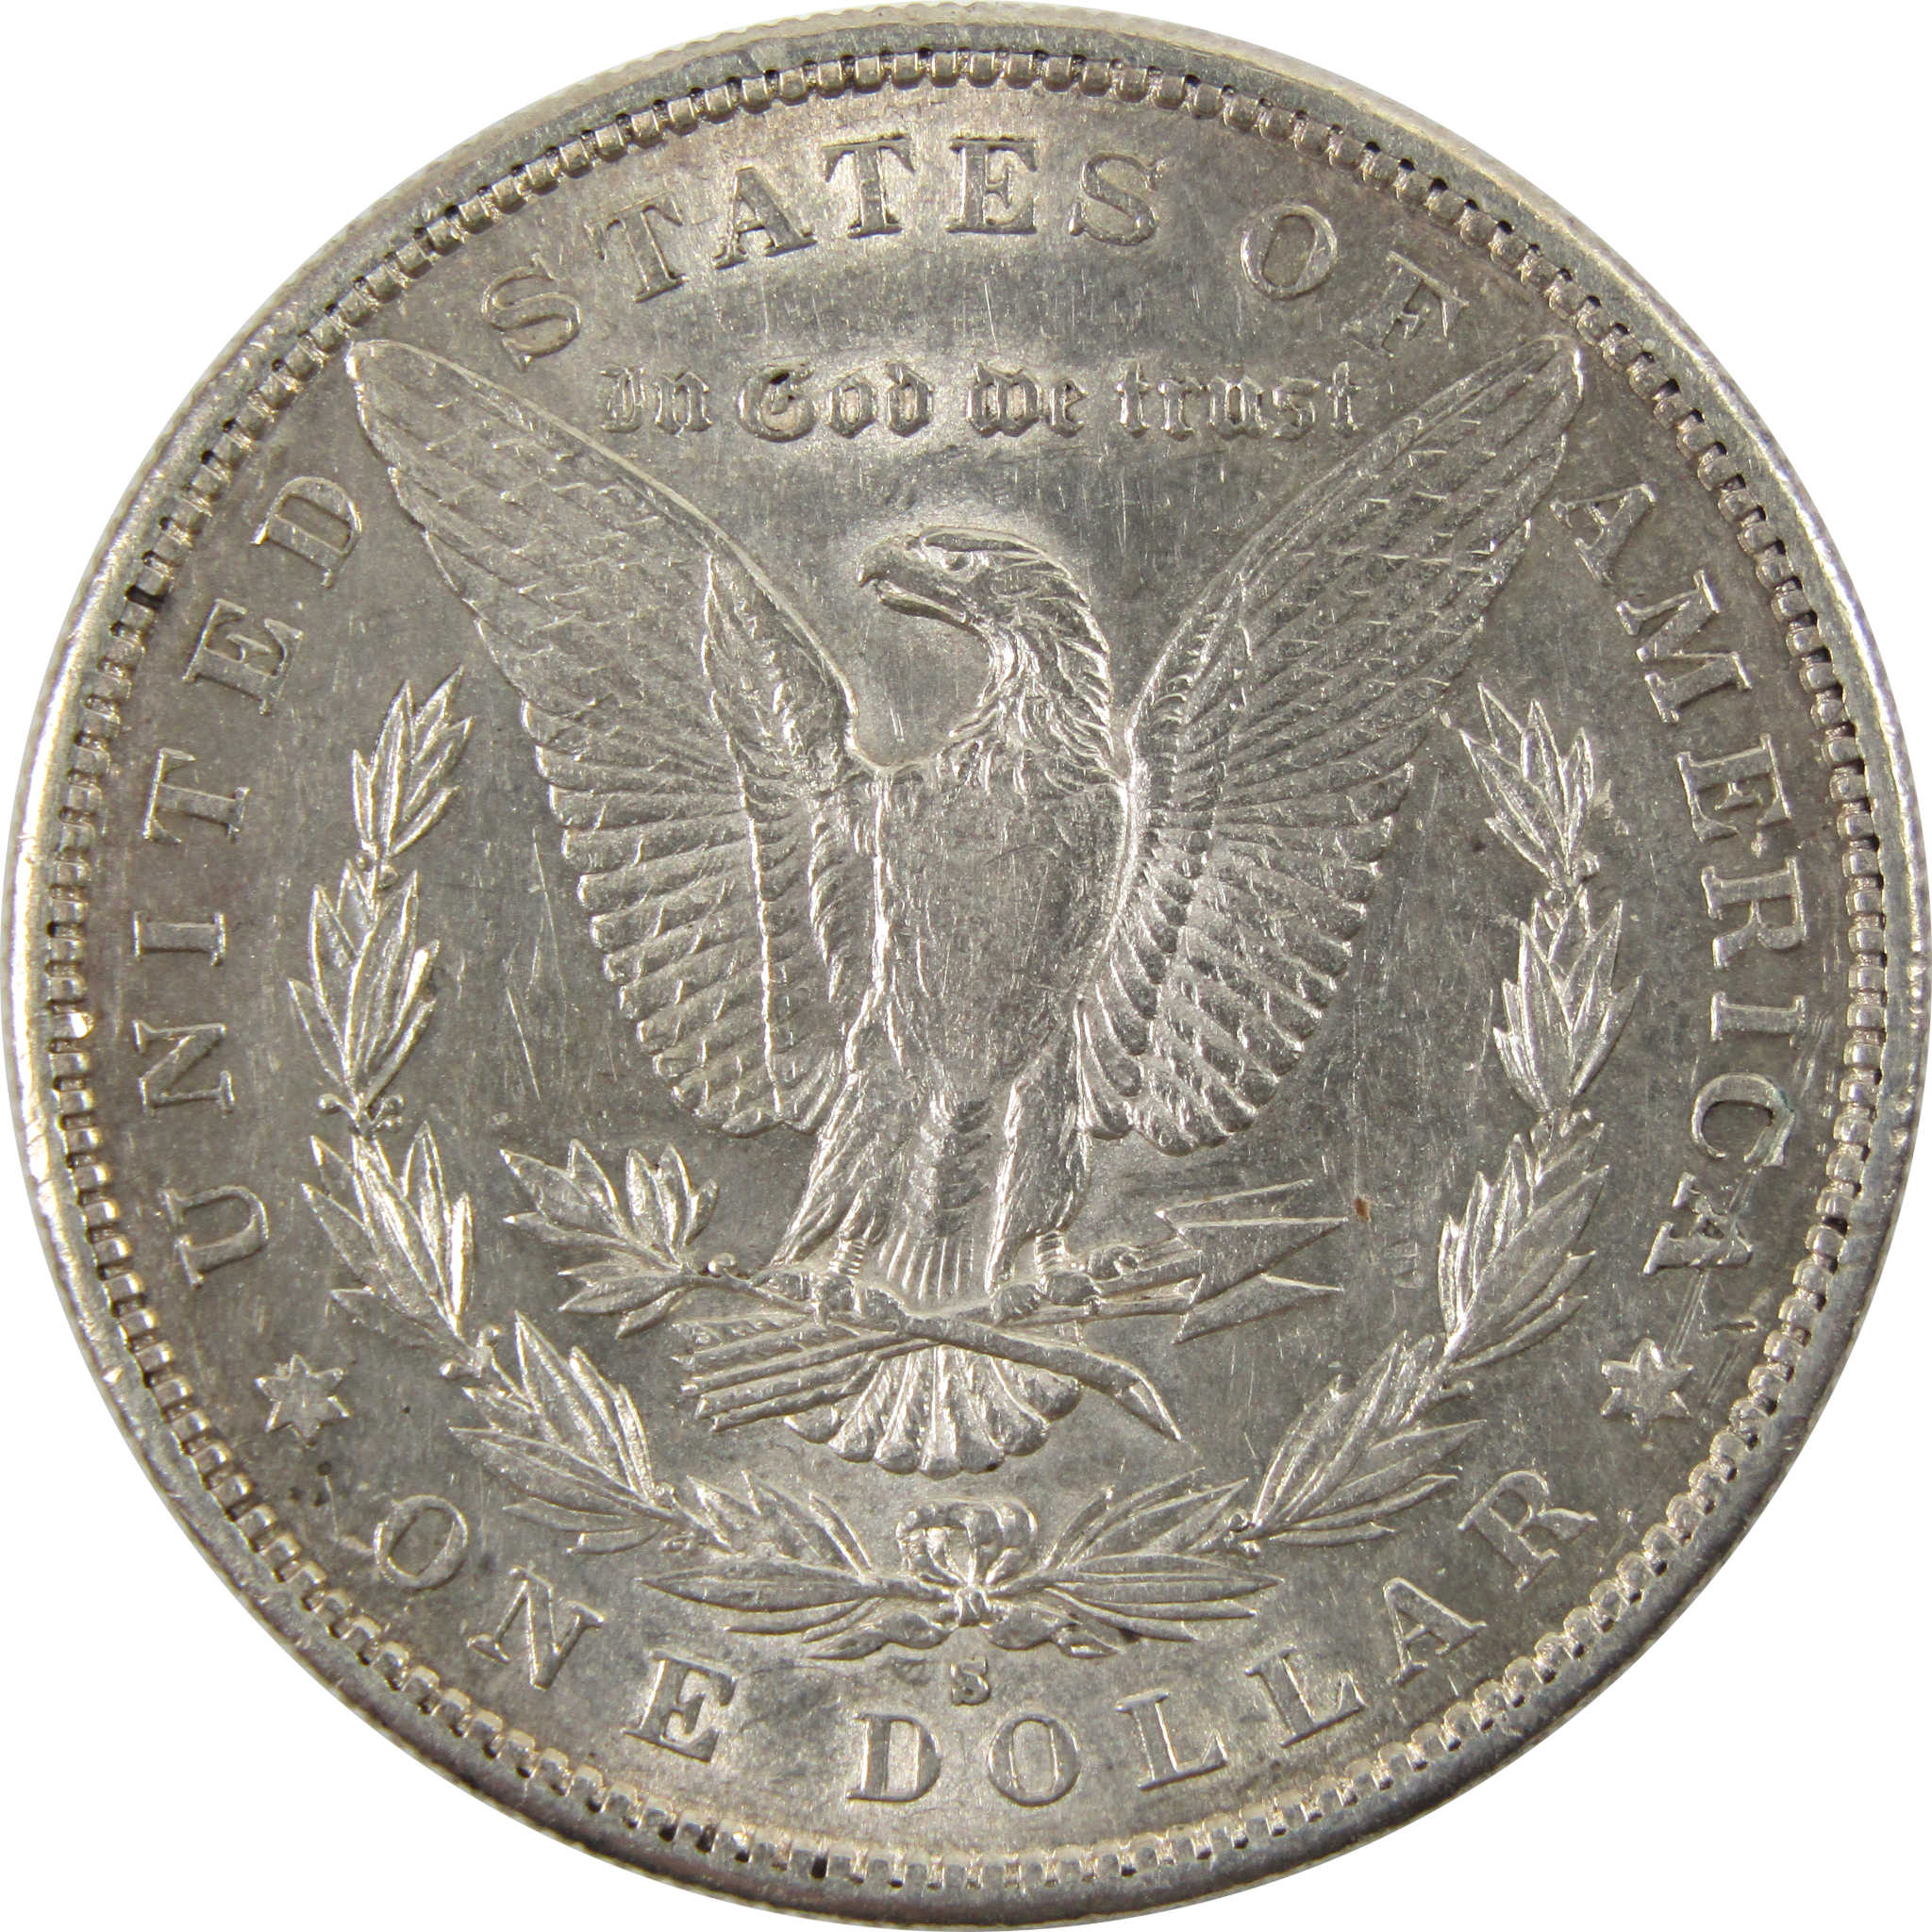 1884 S Morgan Dollar AU About Uncirculated 90% Silver $1 SKU:I9947 - Morgan coin - Morgan silver dollar - Morgan silver dollar for sale - Profile Coins &amp; Collectibles